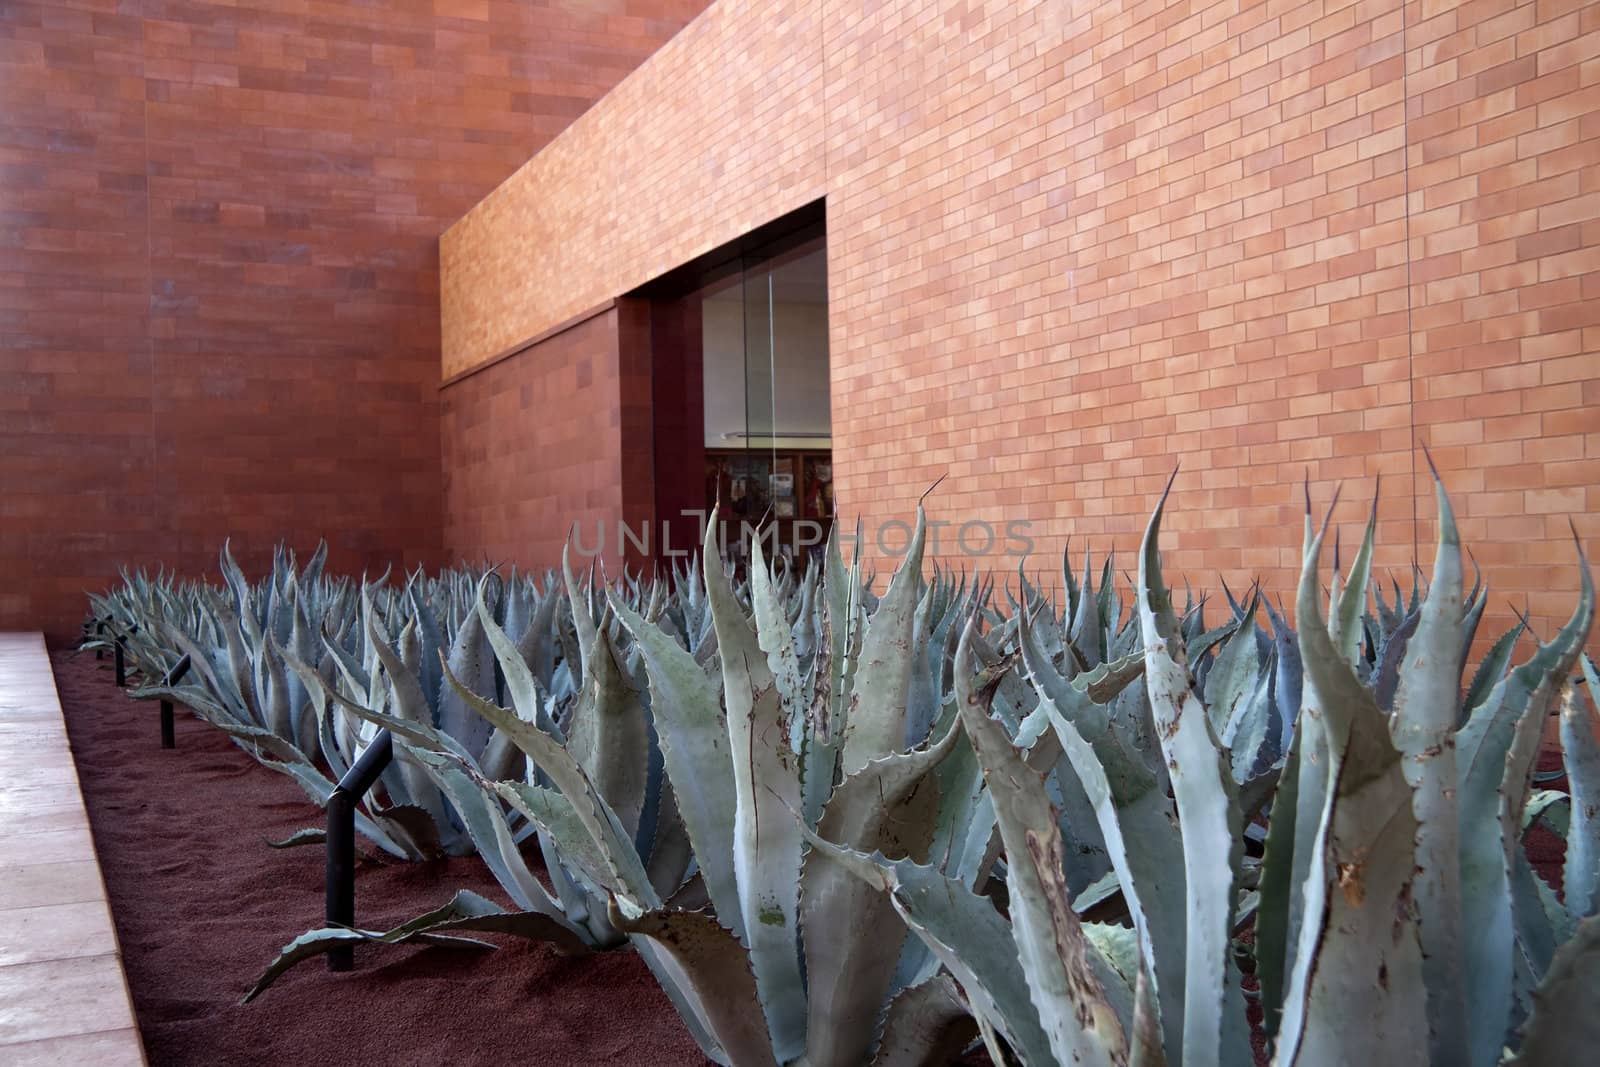 A row of aloe vera plants with a brick building in the background